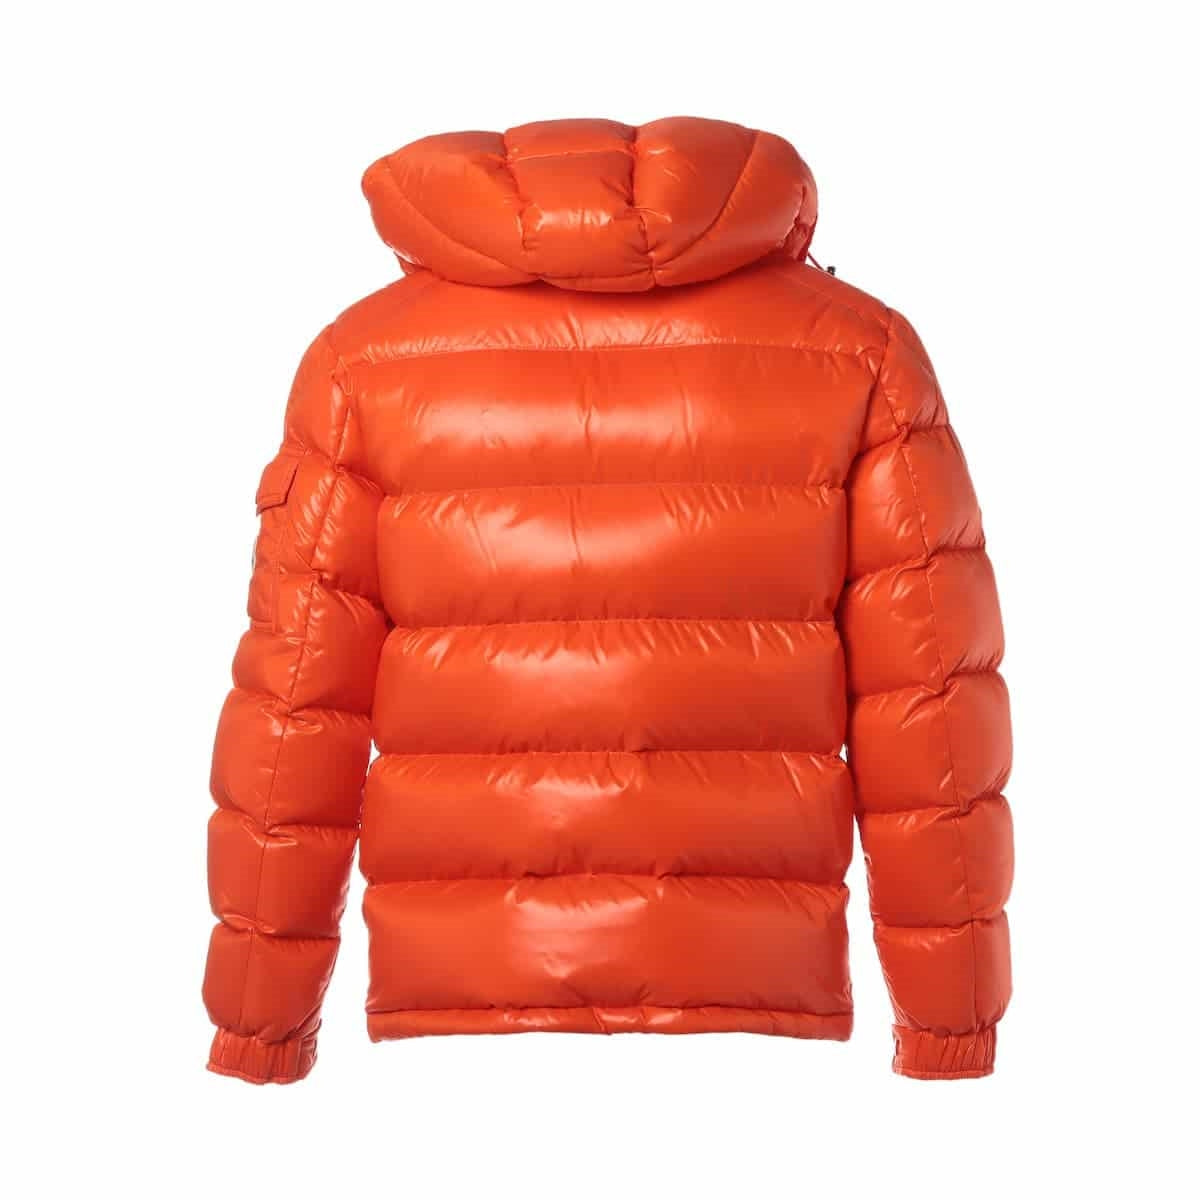 Moncler MAYA 20 years Nylon Down jacket 1 Men's Orange  There is dirt on the collar